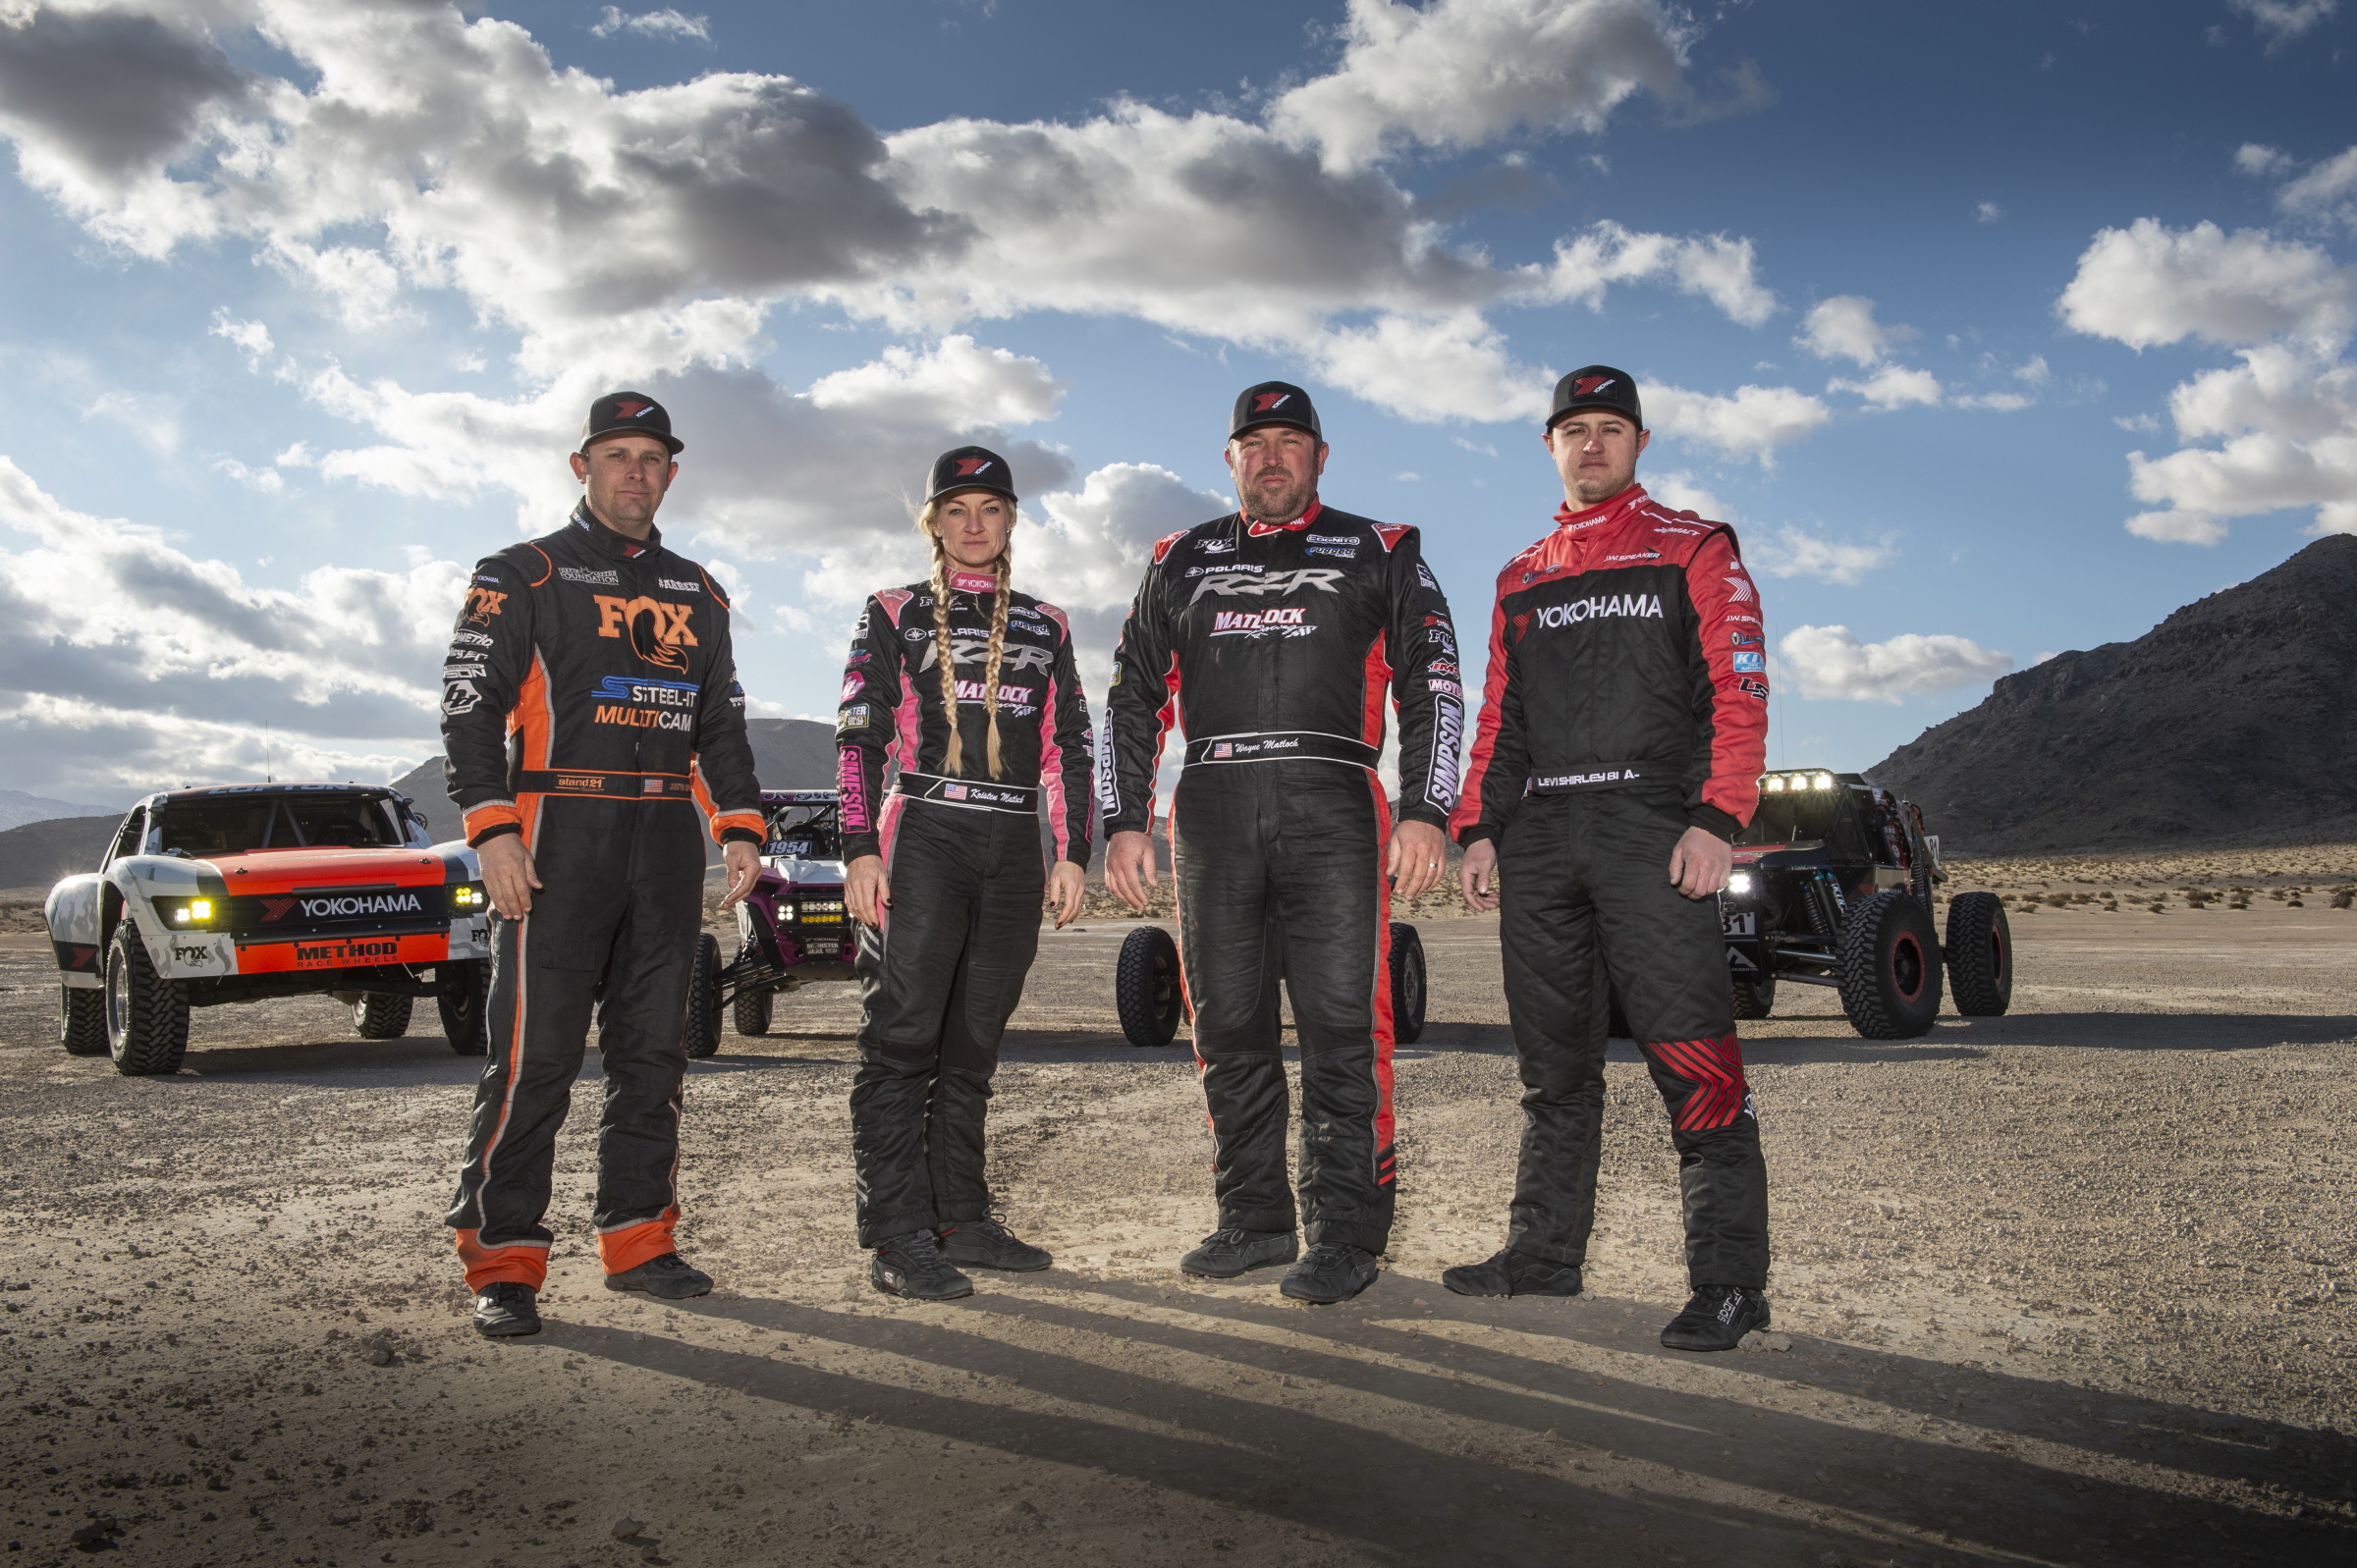  Yokohama Tire Names Two New Off-road Drivers for the 2020 Season Justin Lofton (Trophy Truck) and Levi Shirley (Ultra4 4400 class) will compete on purpose-built GEOLANDAR® M/T-Spec R race tires